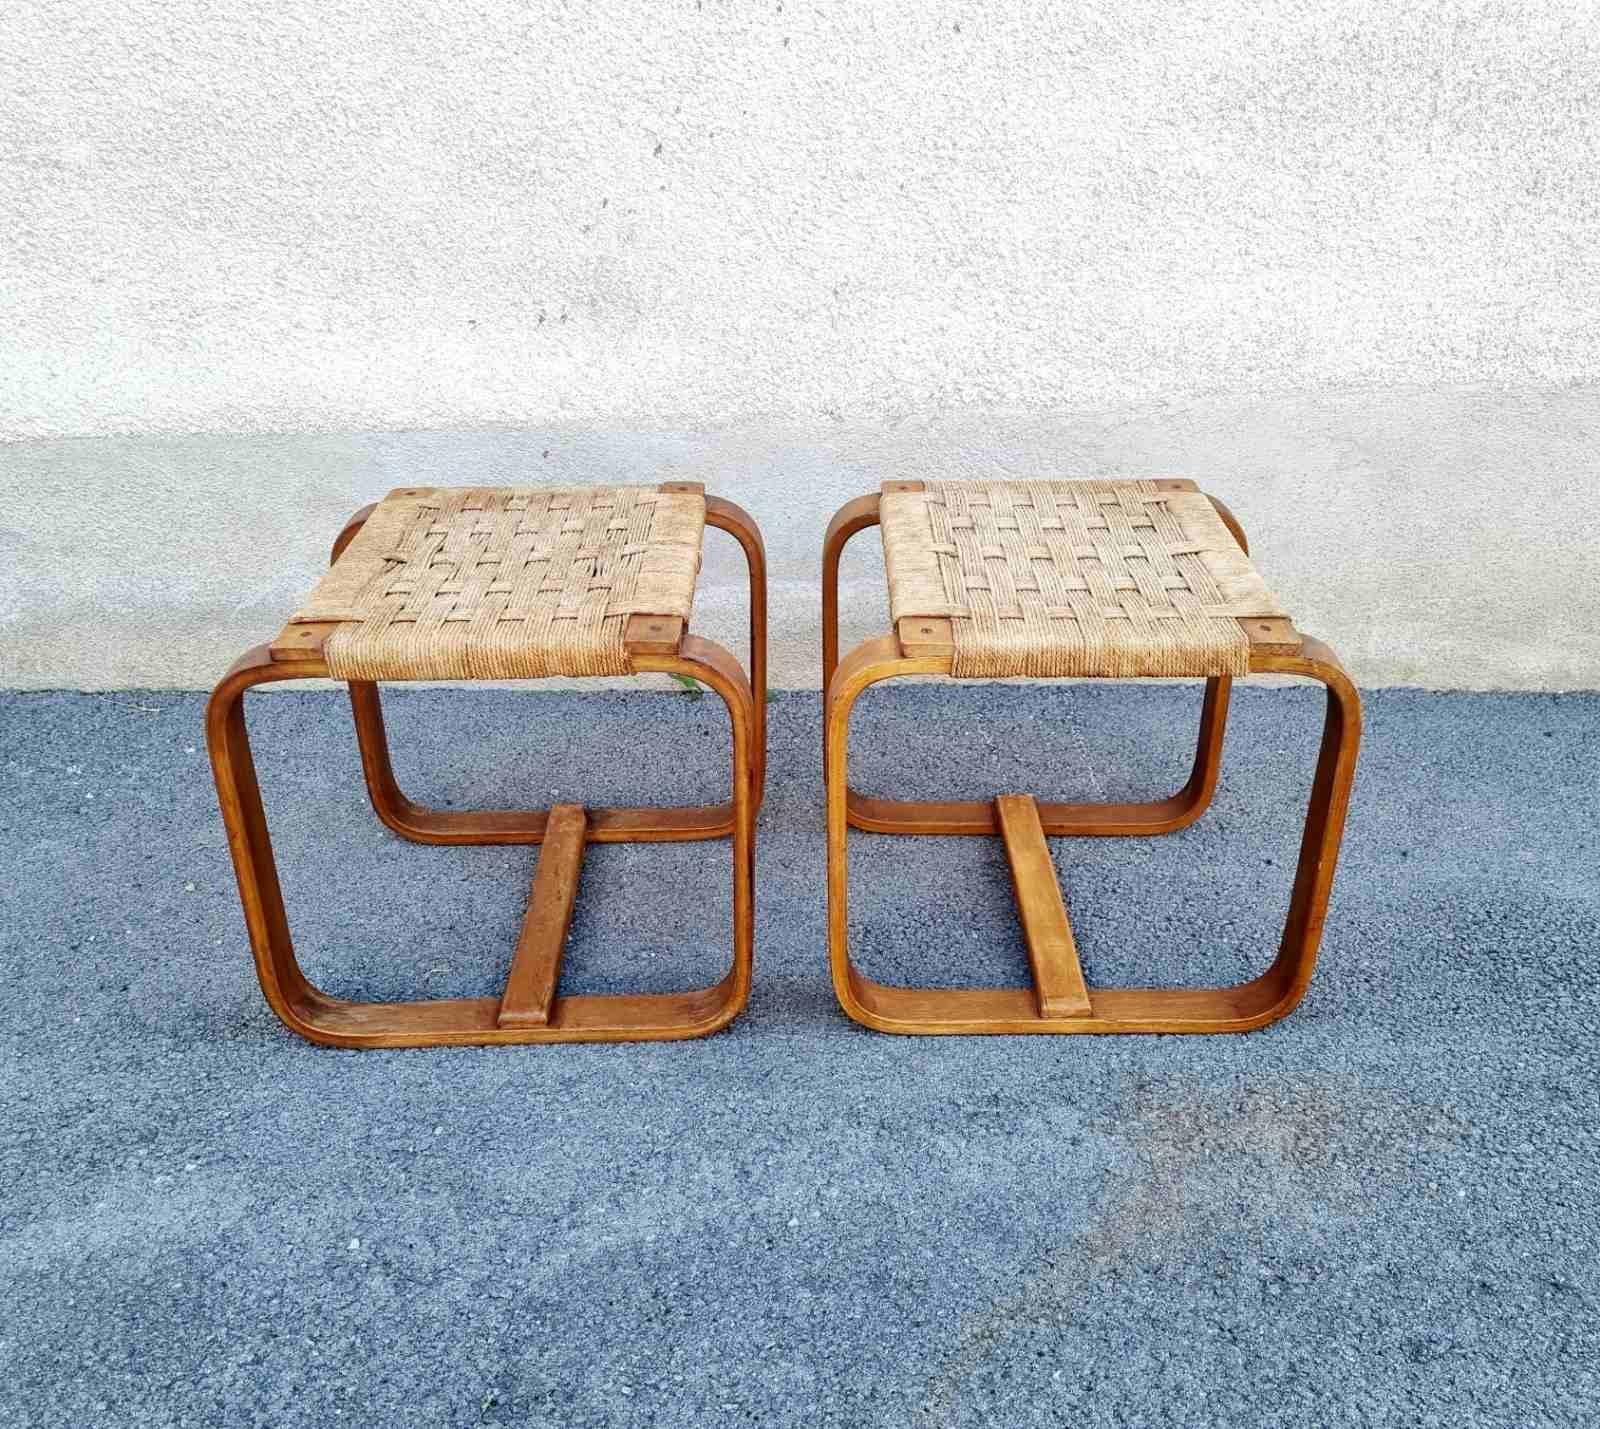 Art Deco Rare Pair of Stools by Giuseppe Pagano Pogatschnig for Gino Maggioni, Italy 40s For Sale